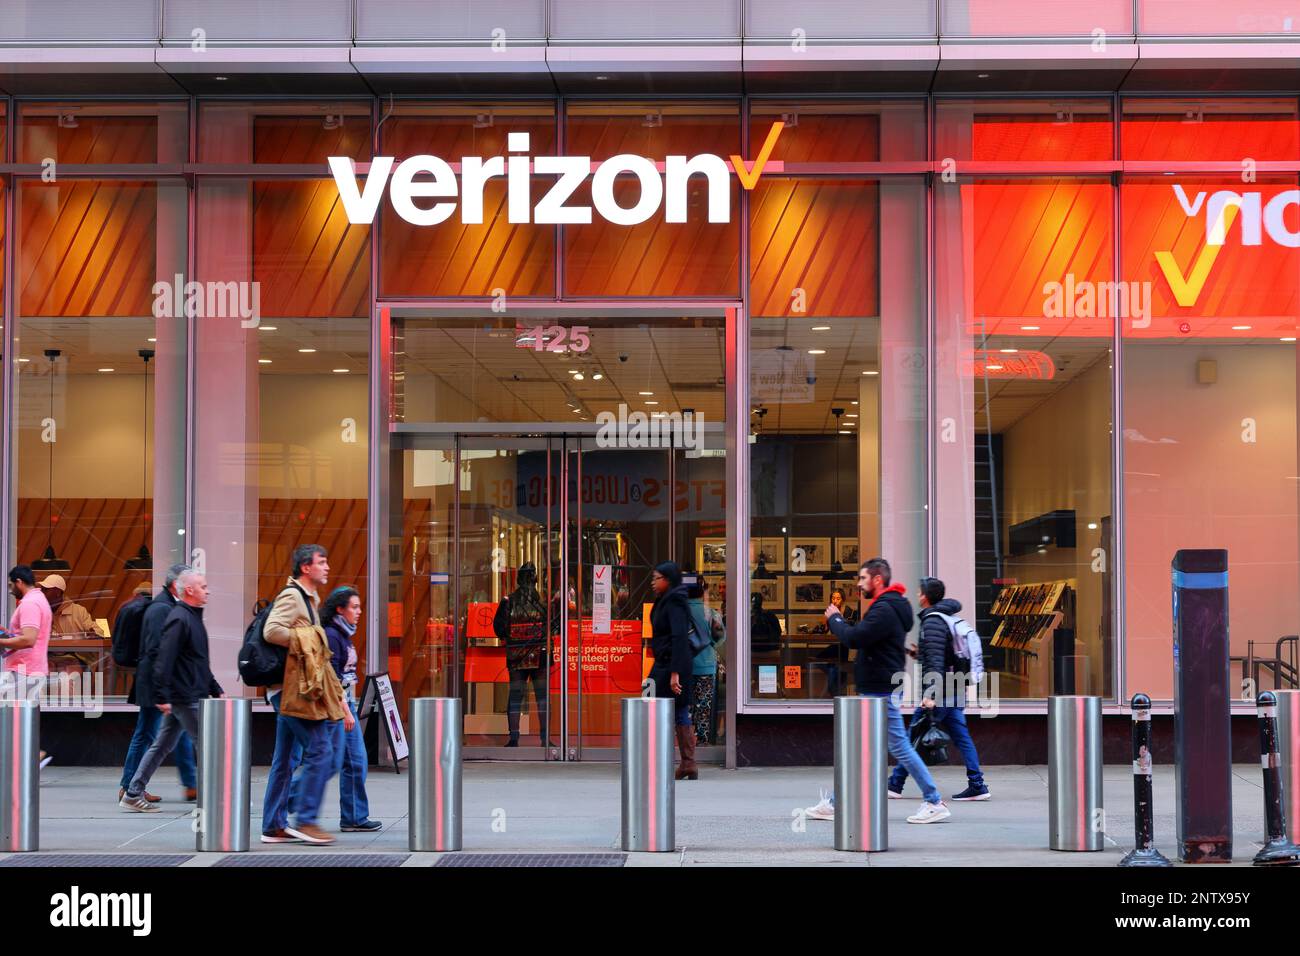 Verizon, 125 W 42nd St, New York. NYC storefront photo of a cellphone store in Midtown Manhattan. Stock Photo